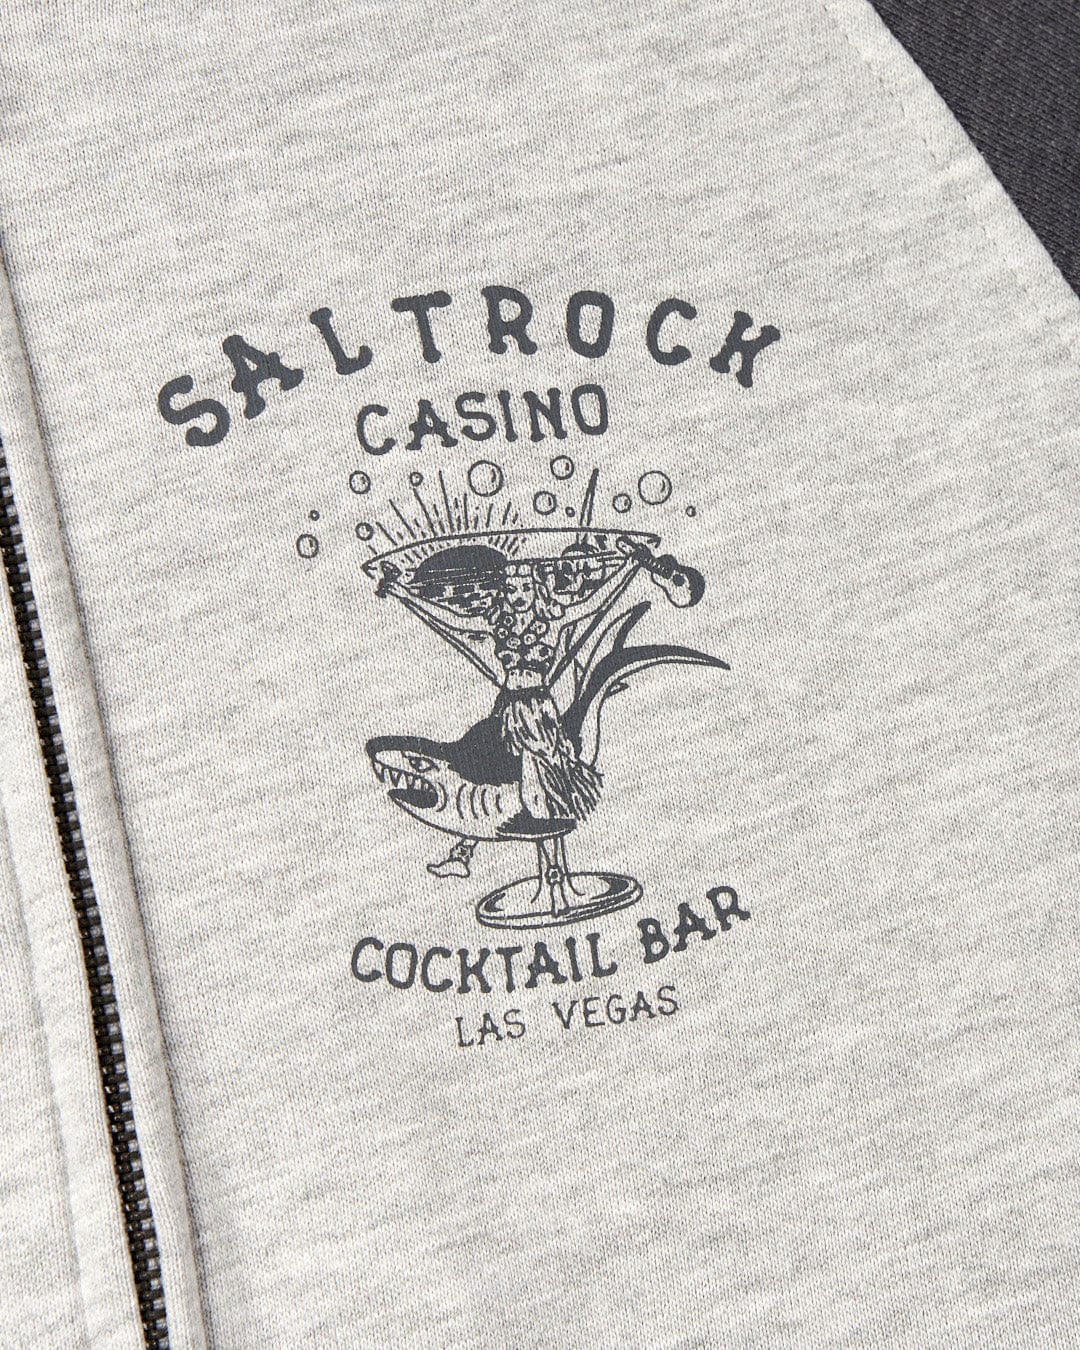 Gray fabric with a "Vegas Cocktail Saltrock" printed logo, featuring an illustration of a cocktail glass and Saltrock branded graphics.